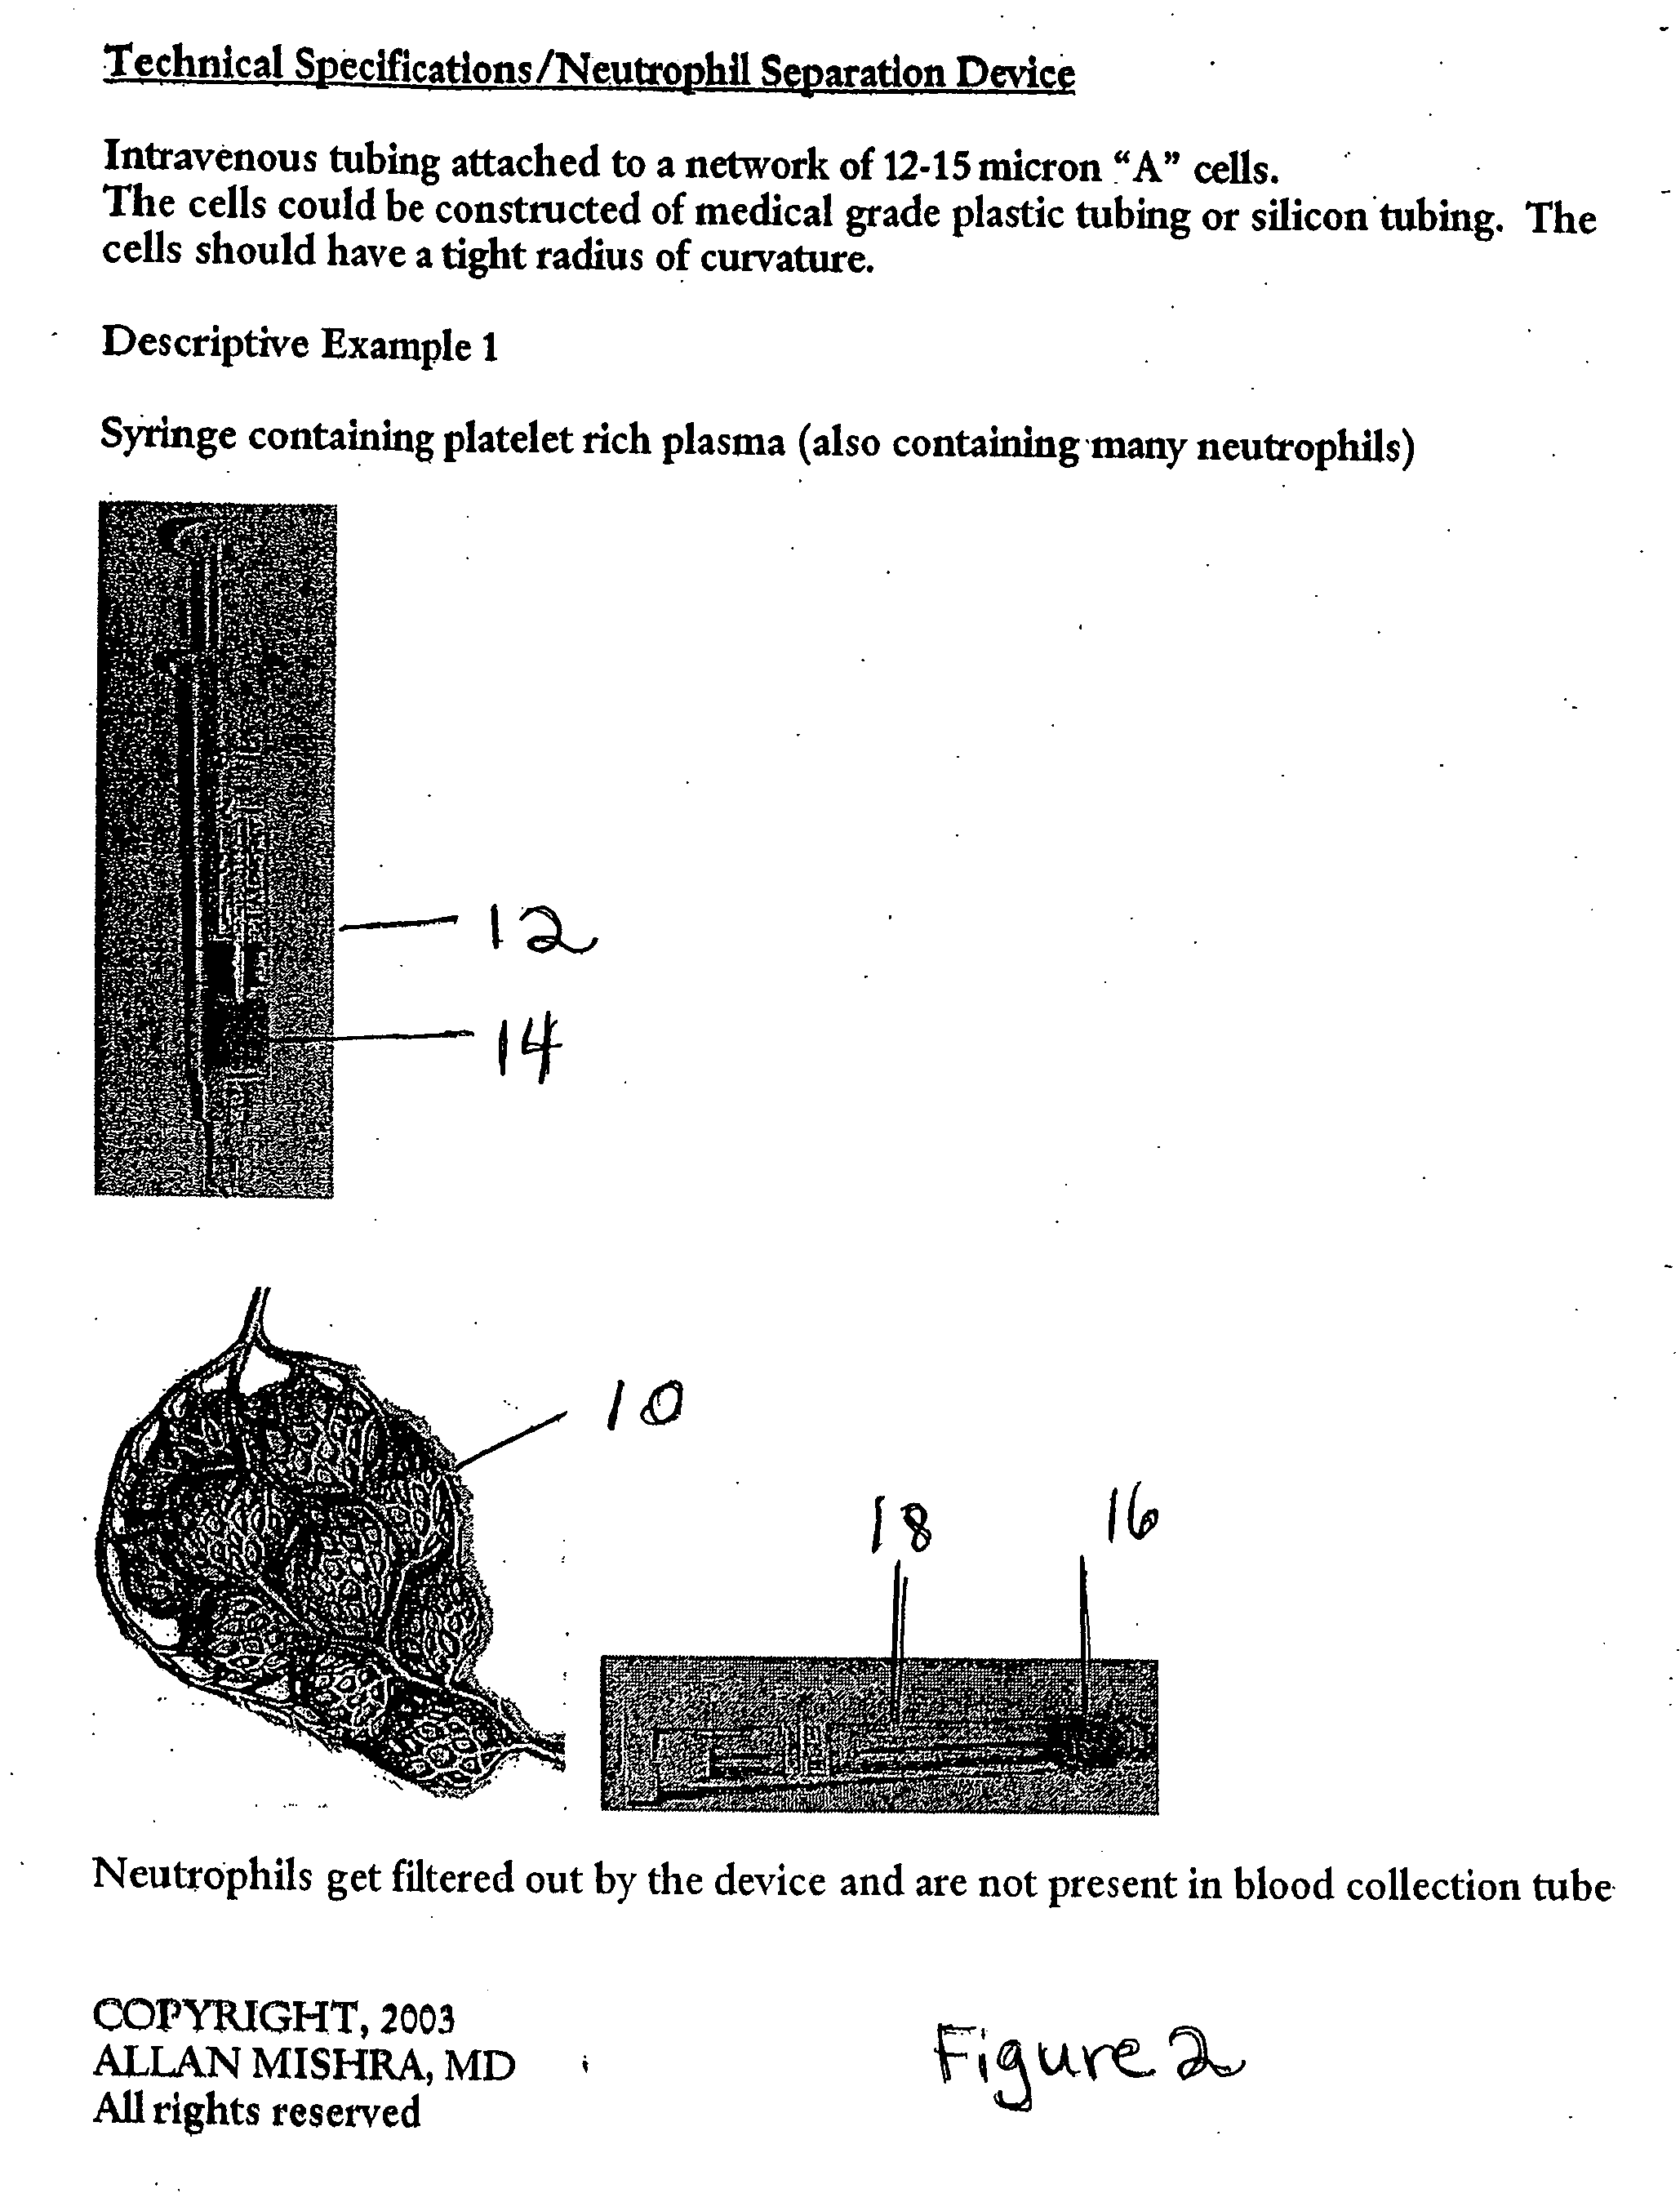 Particle/cell separation device and compositions